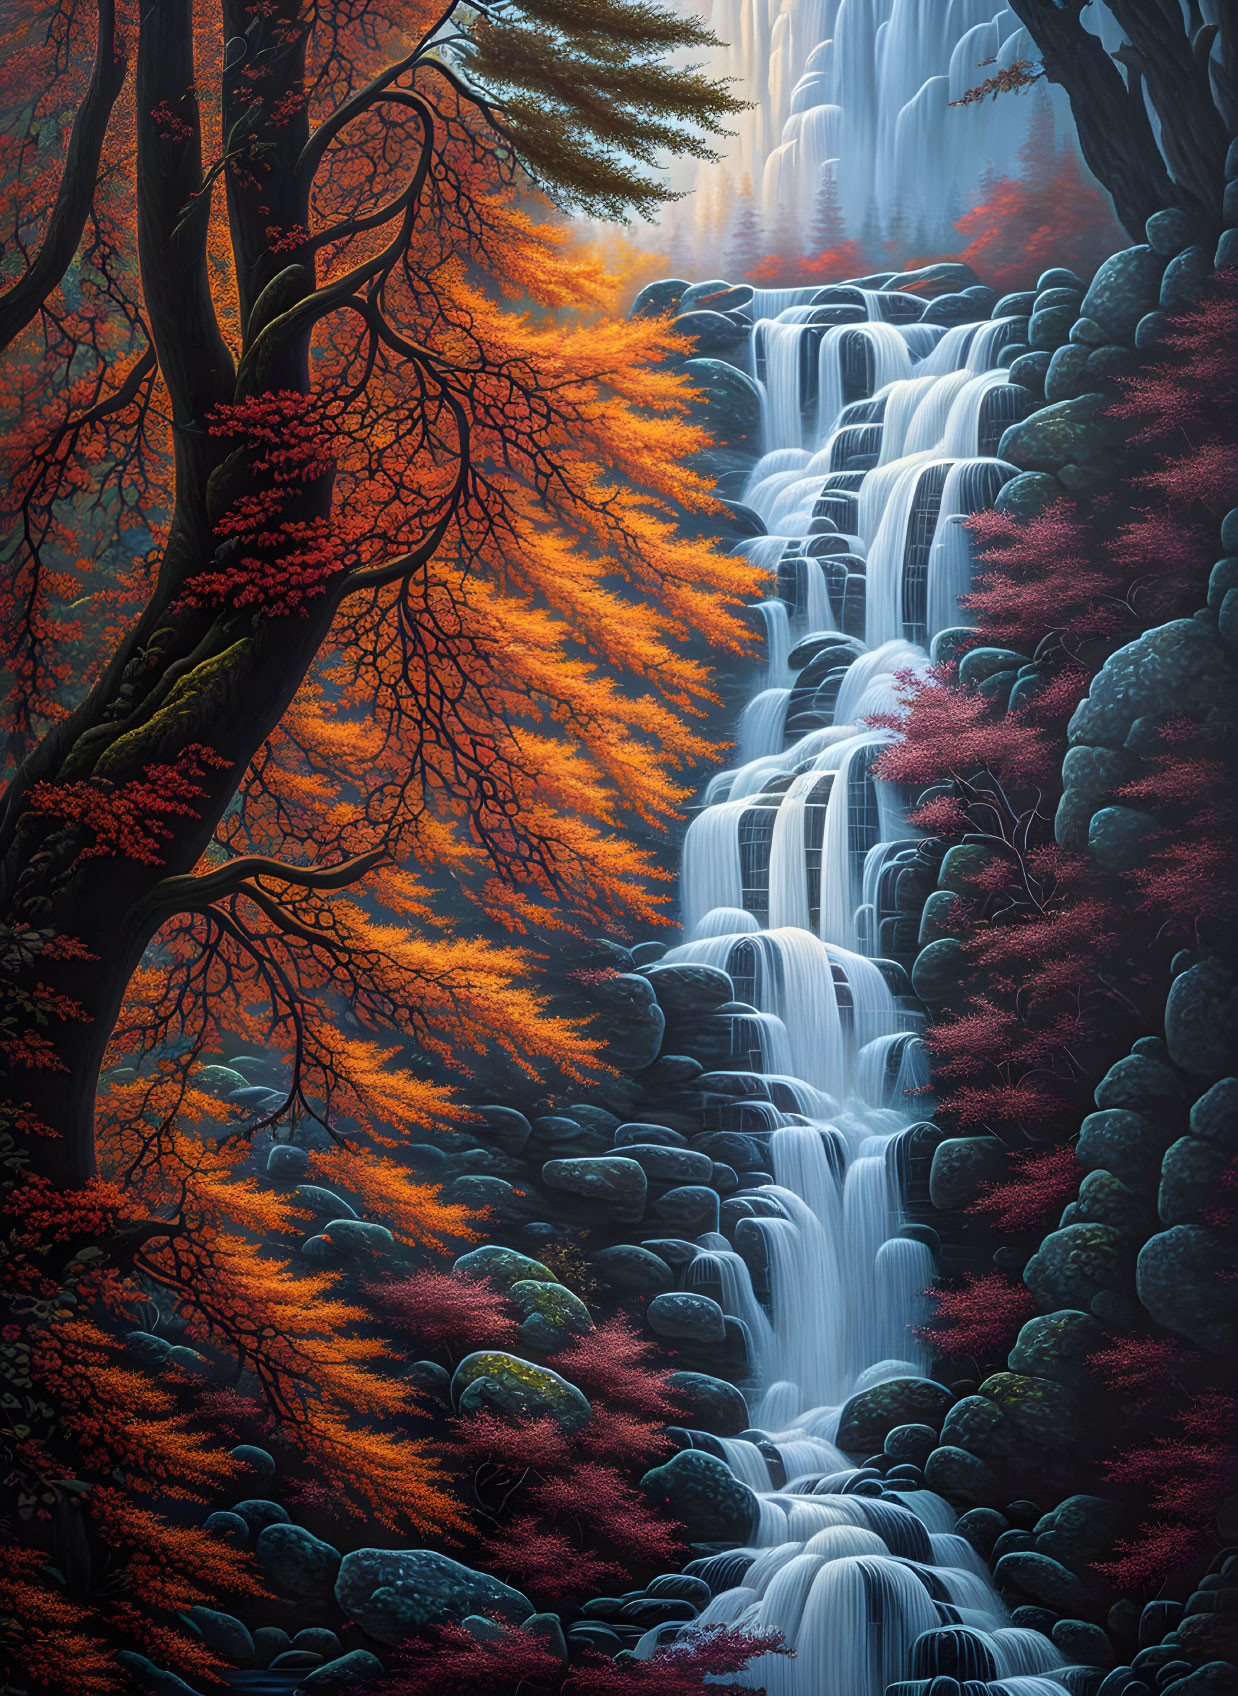 Tranquil waterfall among mossy rocks and autumn trees